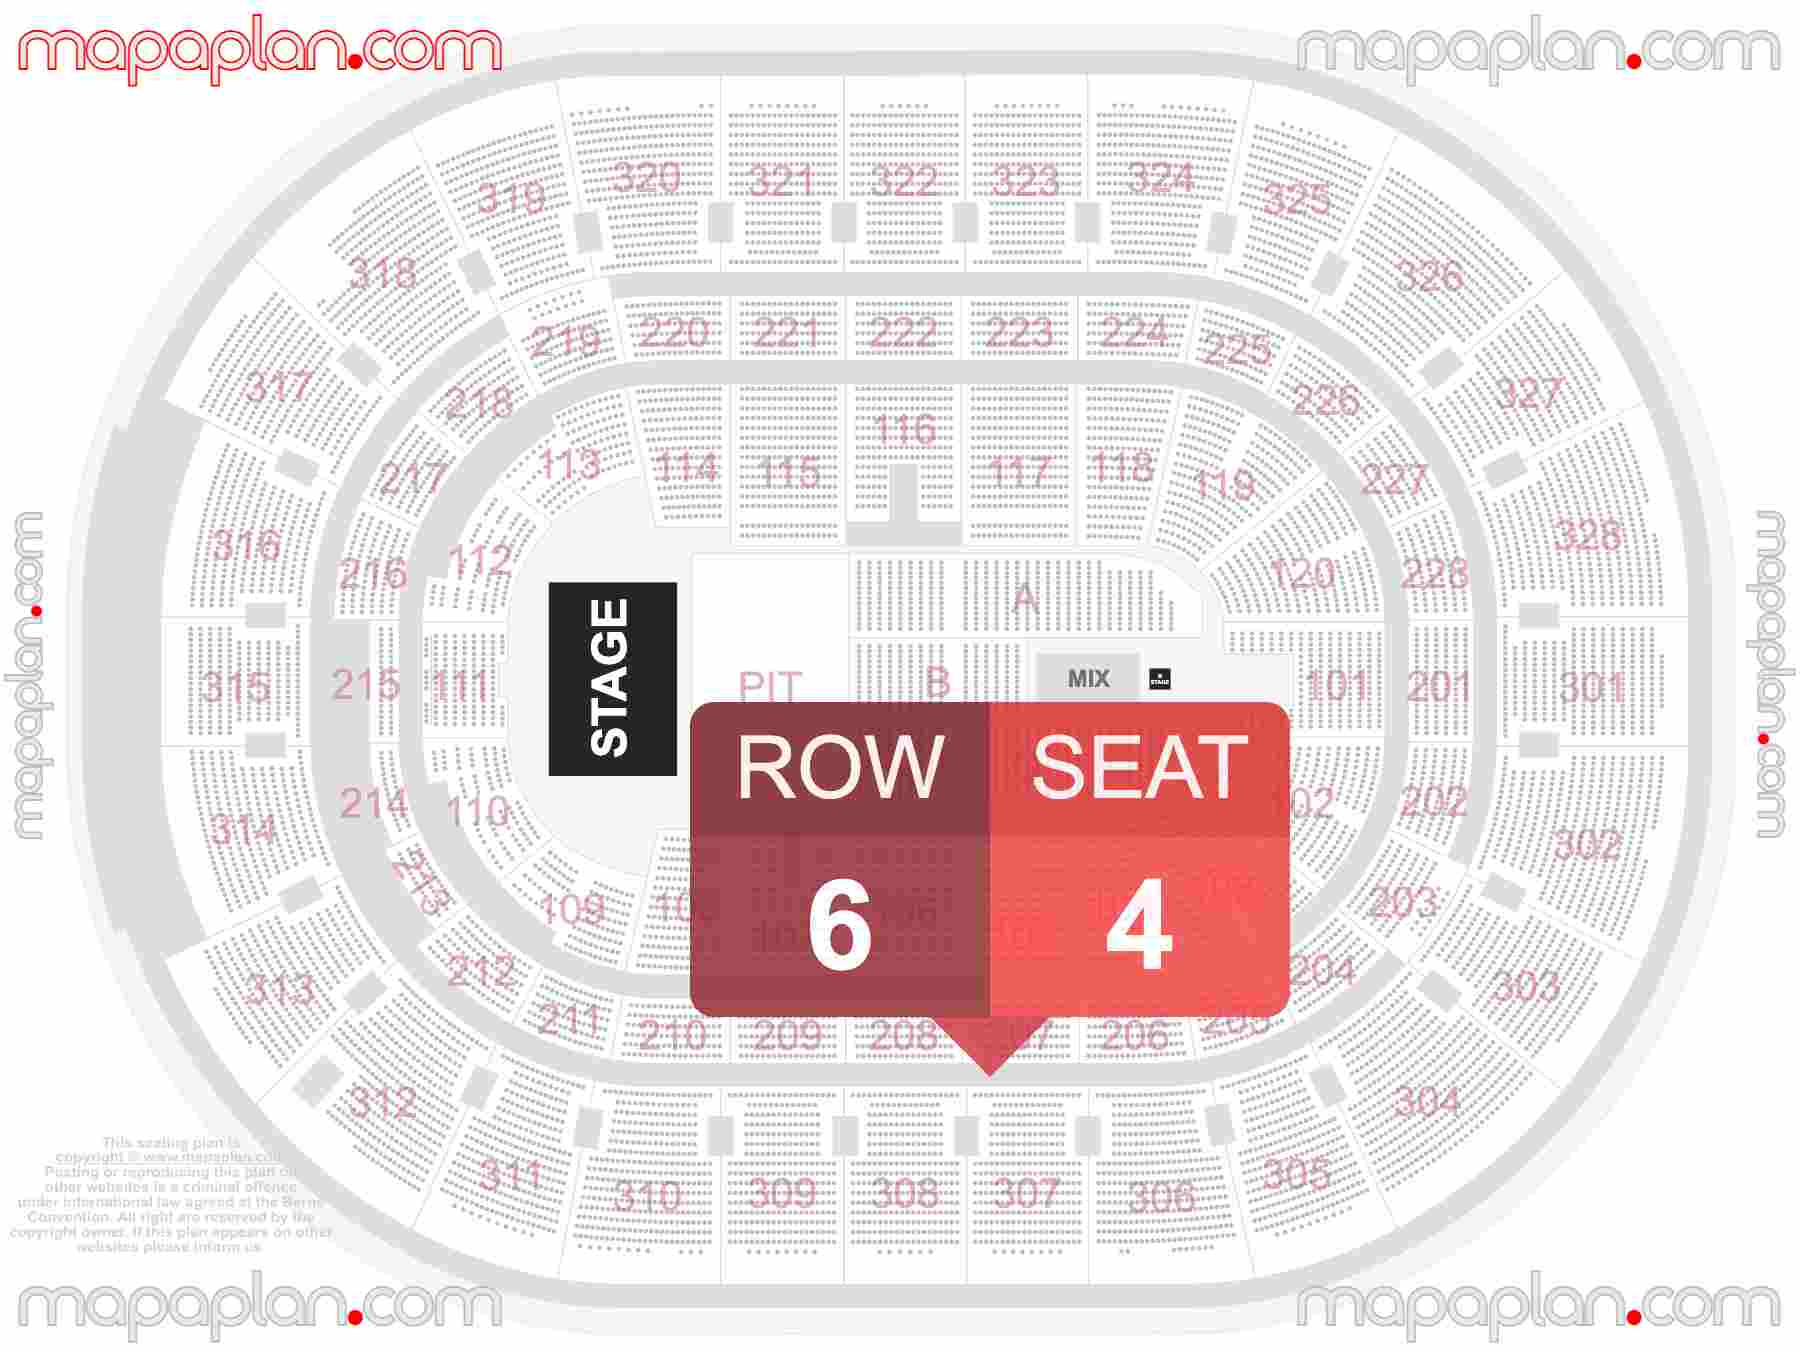 Ottawa Canadian Tire Centre seating map Concert with PIT floor standing find best seats row numbering system chart showing how many seats per row - Individual 'find my seat' virtual locator